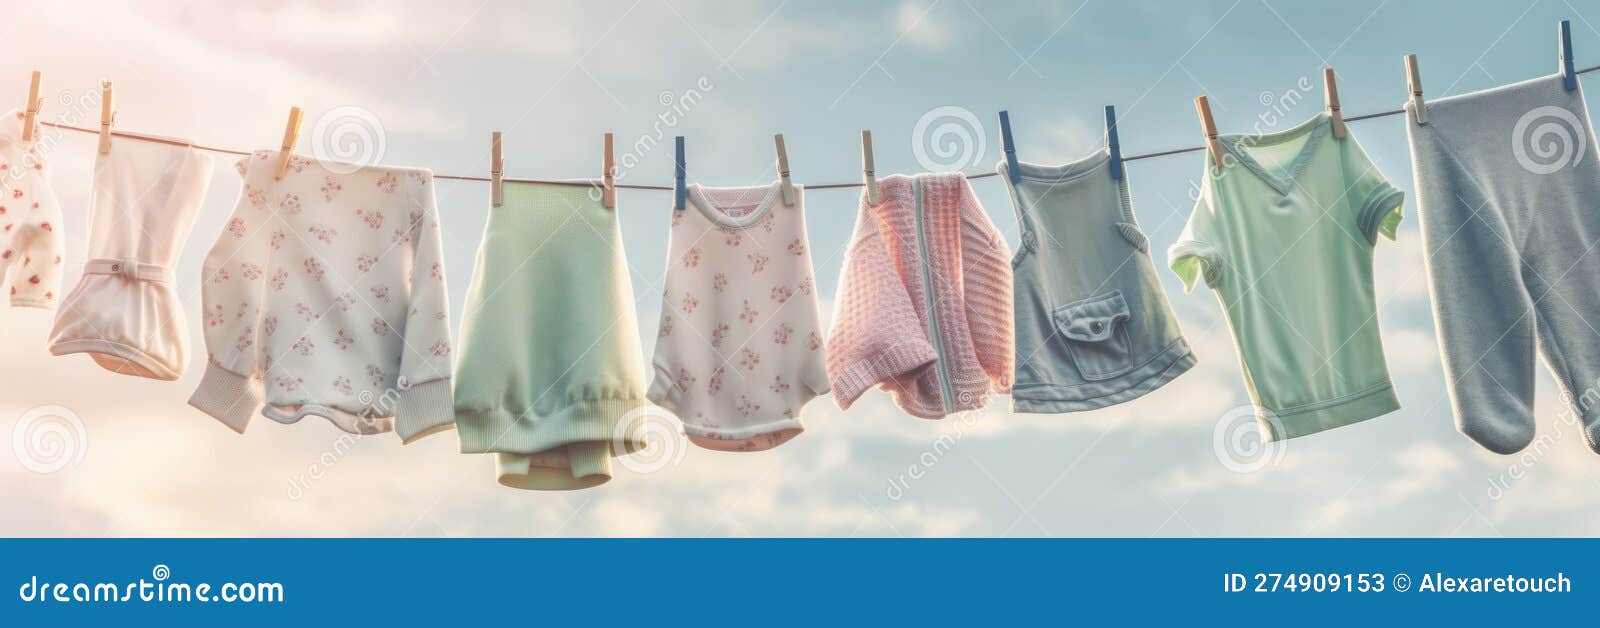 washed clothes hanging on a clothesline in the street on a sunny day. washday